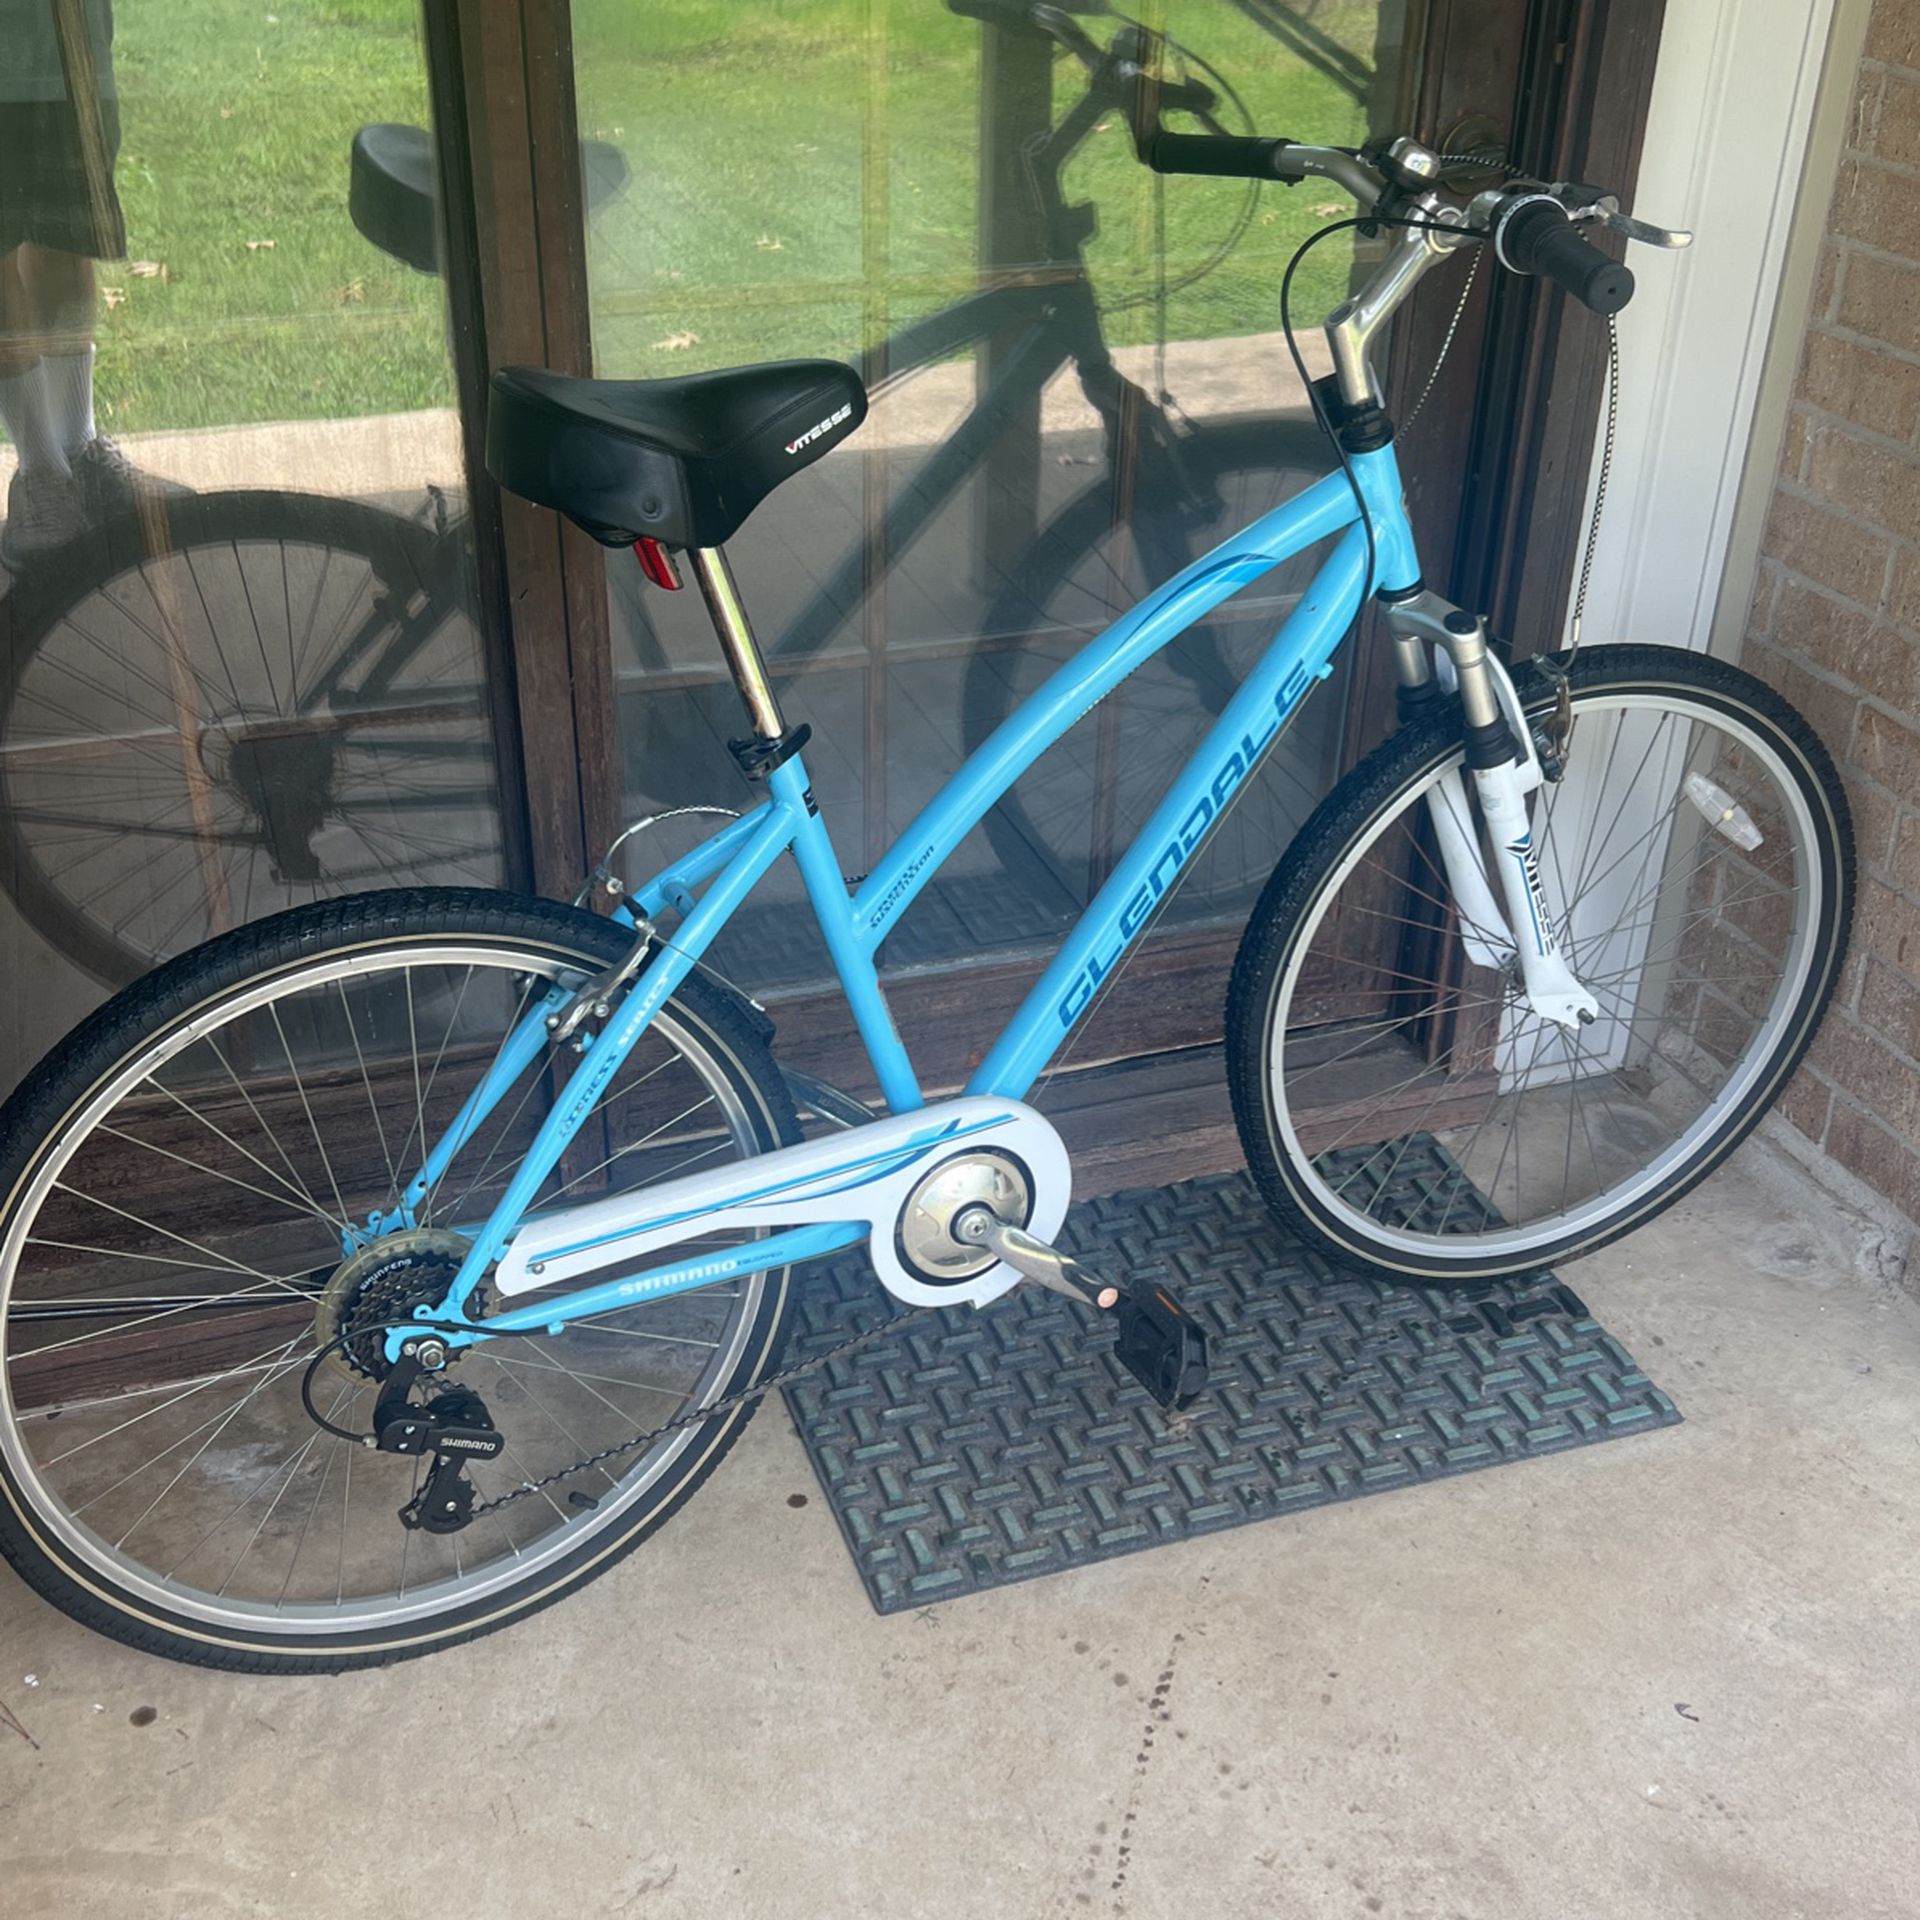 Ladies Street mountain bike with gears, brakes, work tires, great condition comfortable seat